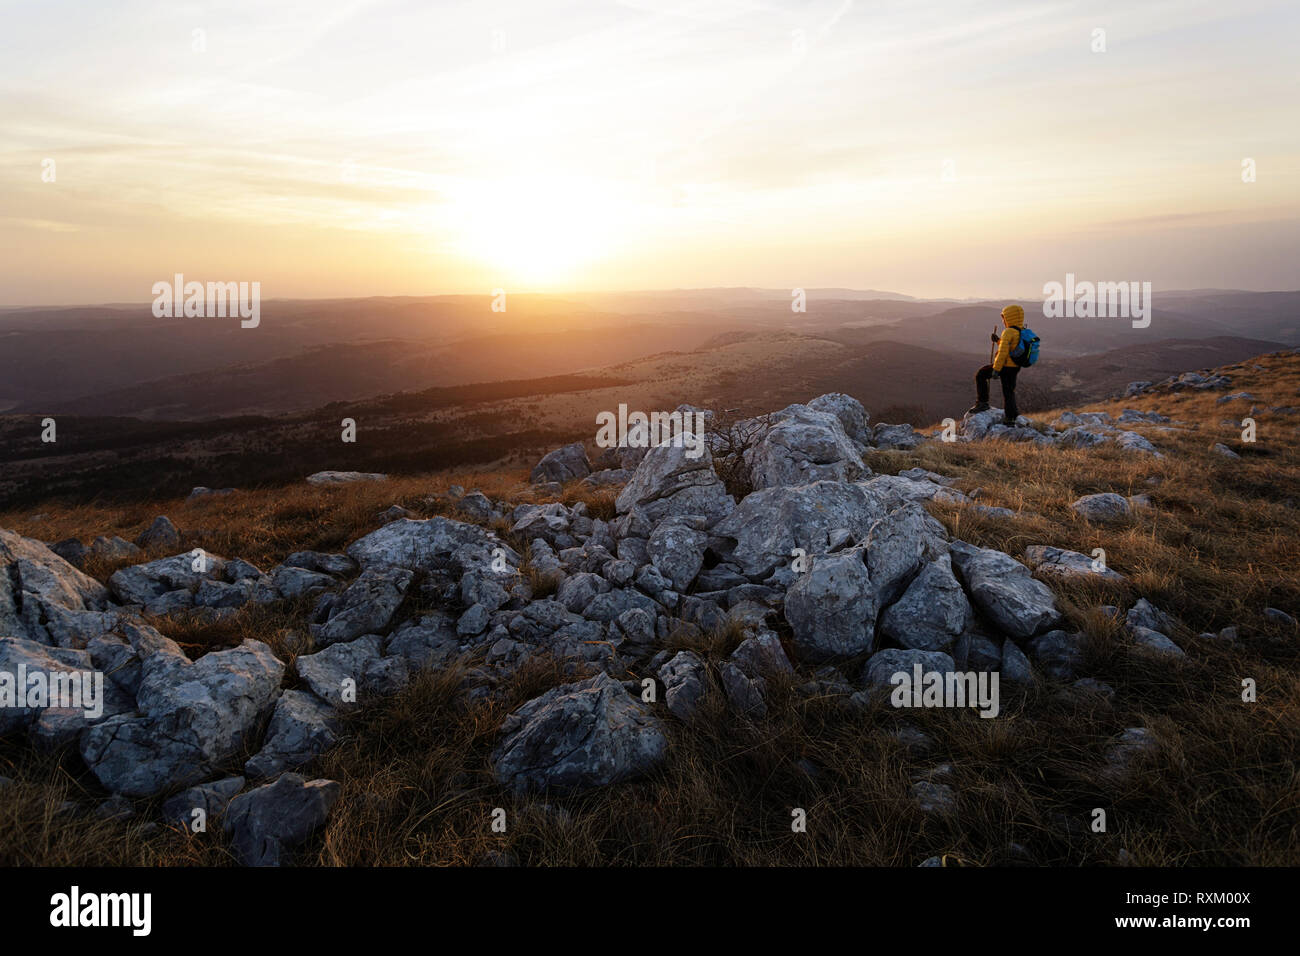 Boy hiking on a grass covered mountain at sunset, Golic, Slovenia Stock Photo